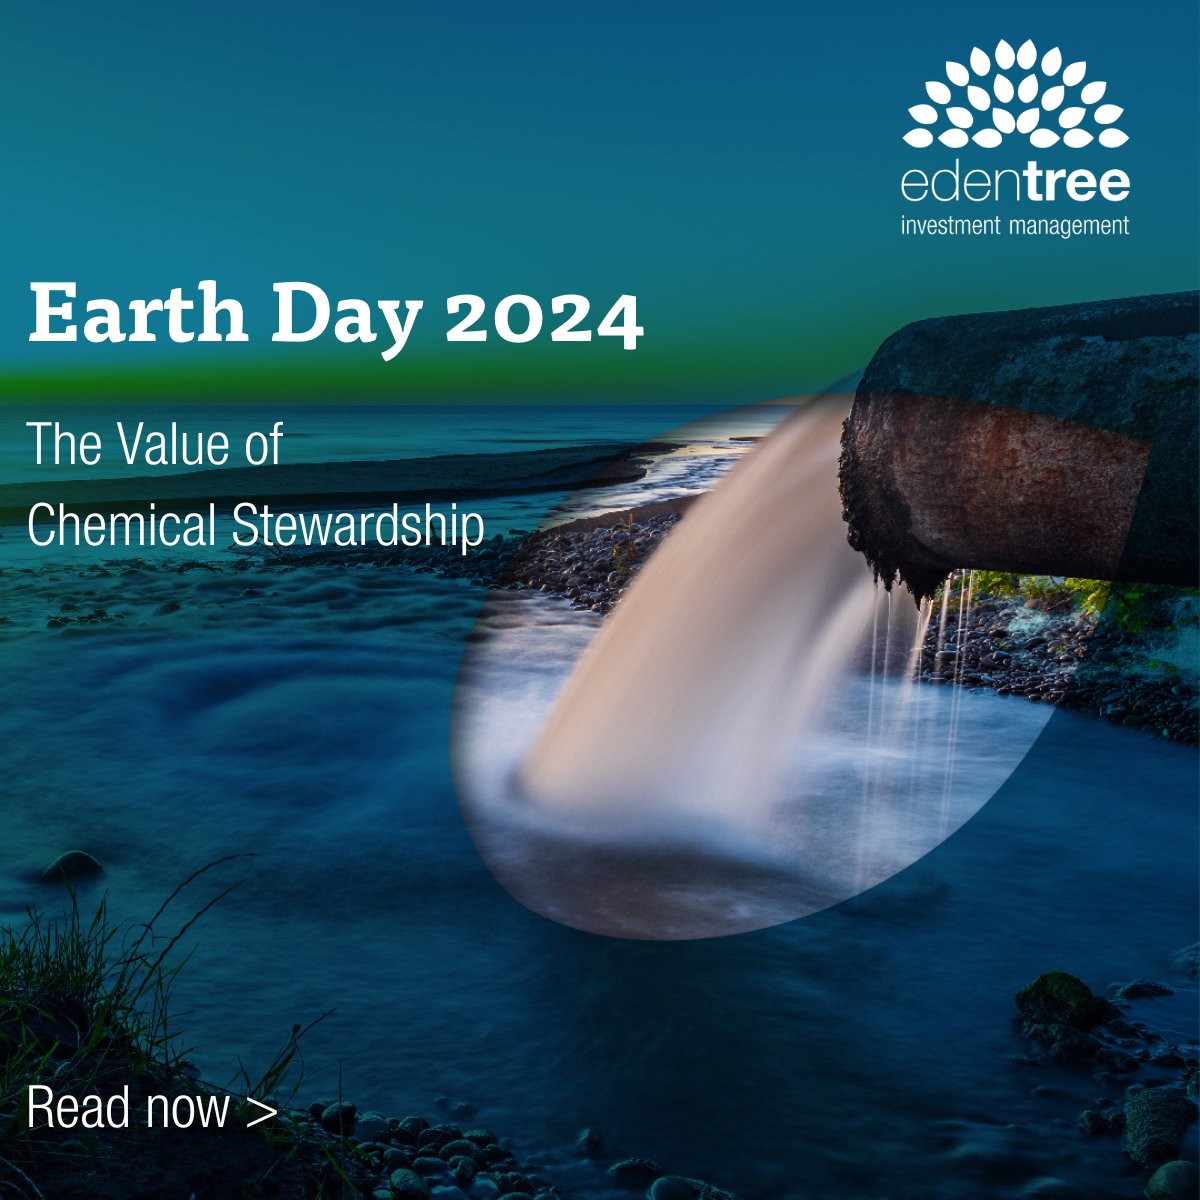 Happy Earth Day from EdenTree. Read our latest blog on the importance of water and hazardous chemical stewardship in protecting the planet. Read here edentreeim.com/insights/the-v… #WorldEarthDay2024 #chemicalpolution #enviromentalhealth #responsibleinvesting